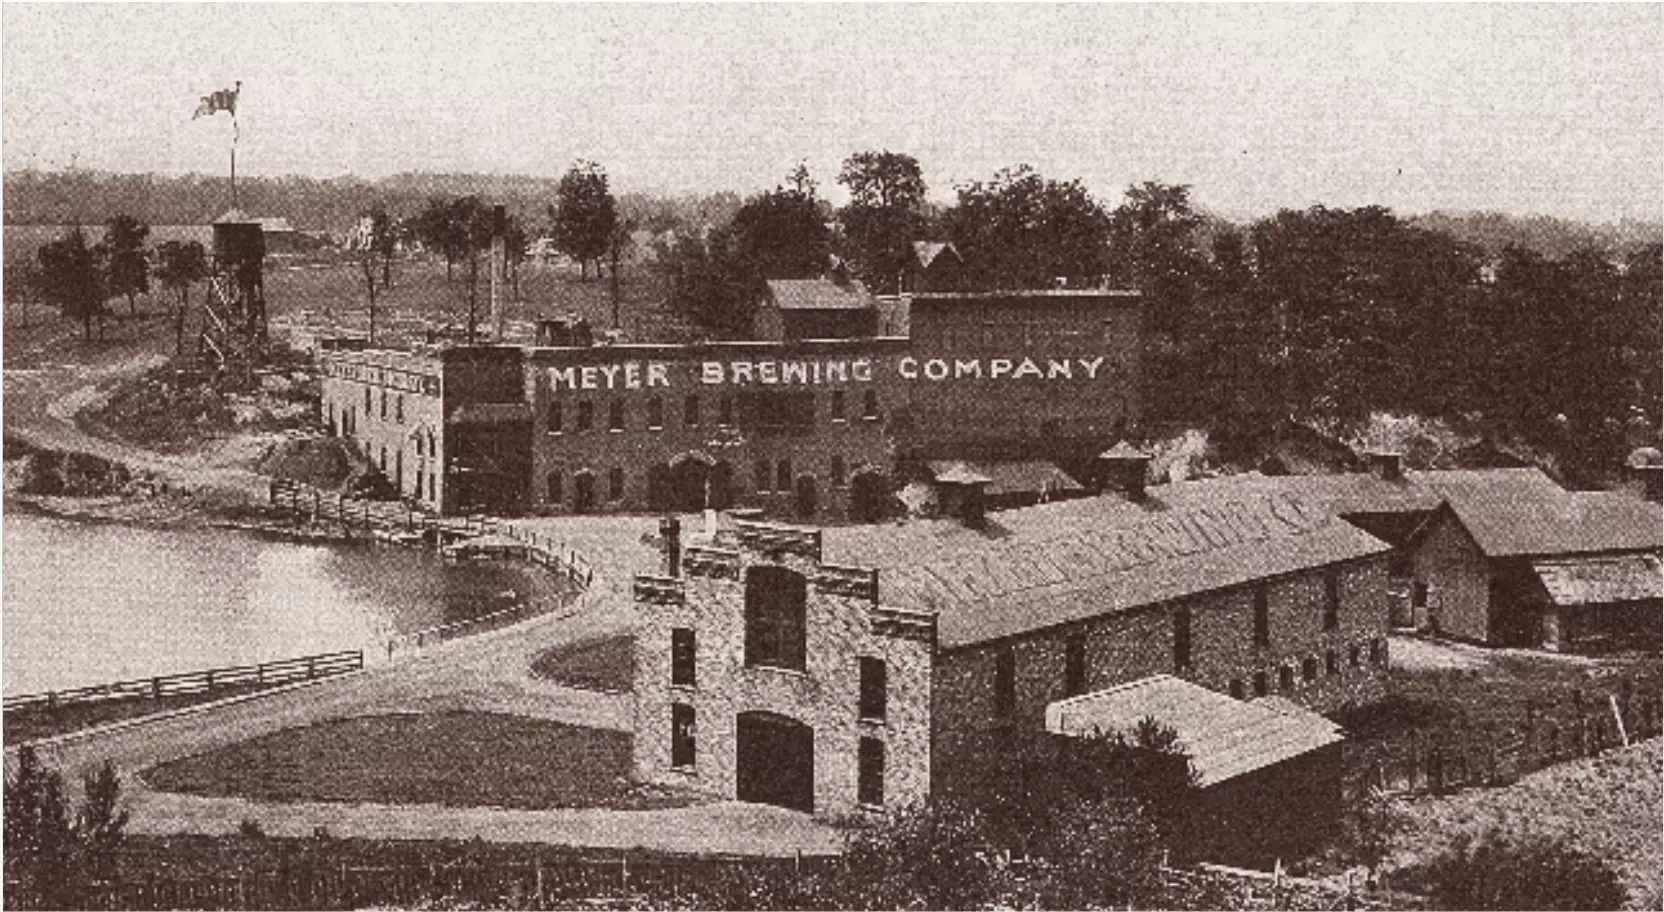 A view of a few brick buildings, one says MEYER BREWING COMPANY in big letters across the side. Trees and a water tank are in the background. On the left side of the image is a lake.